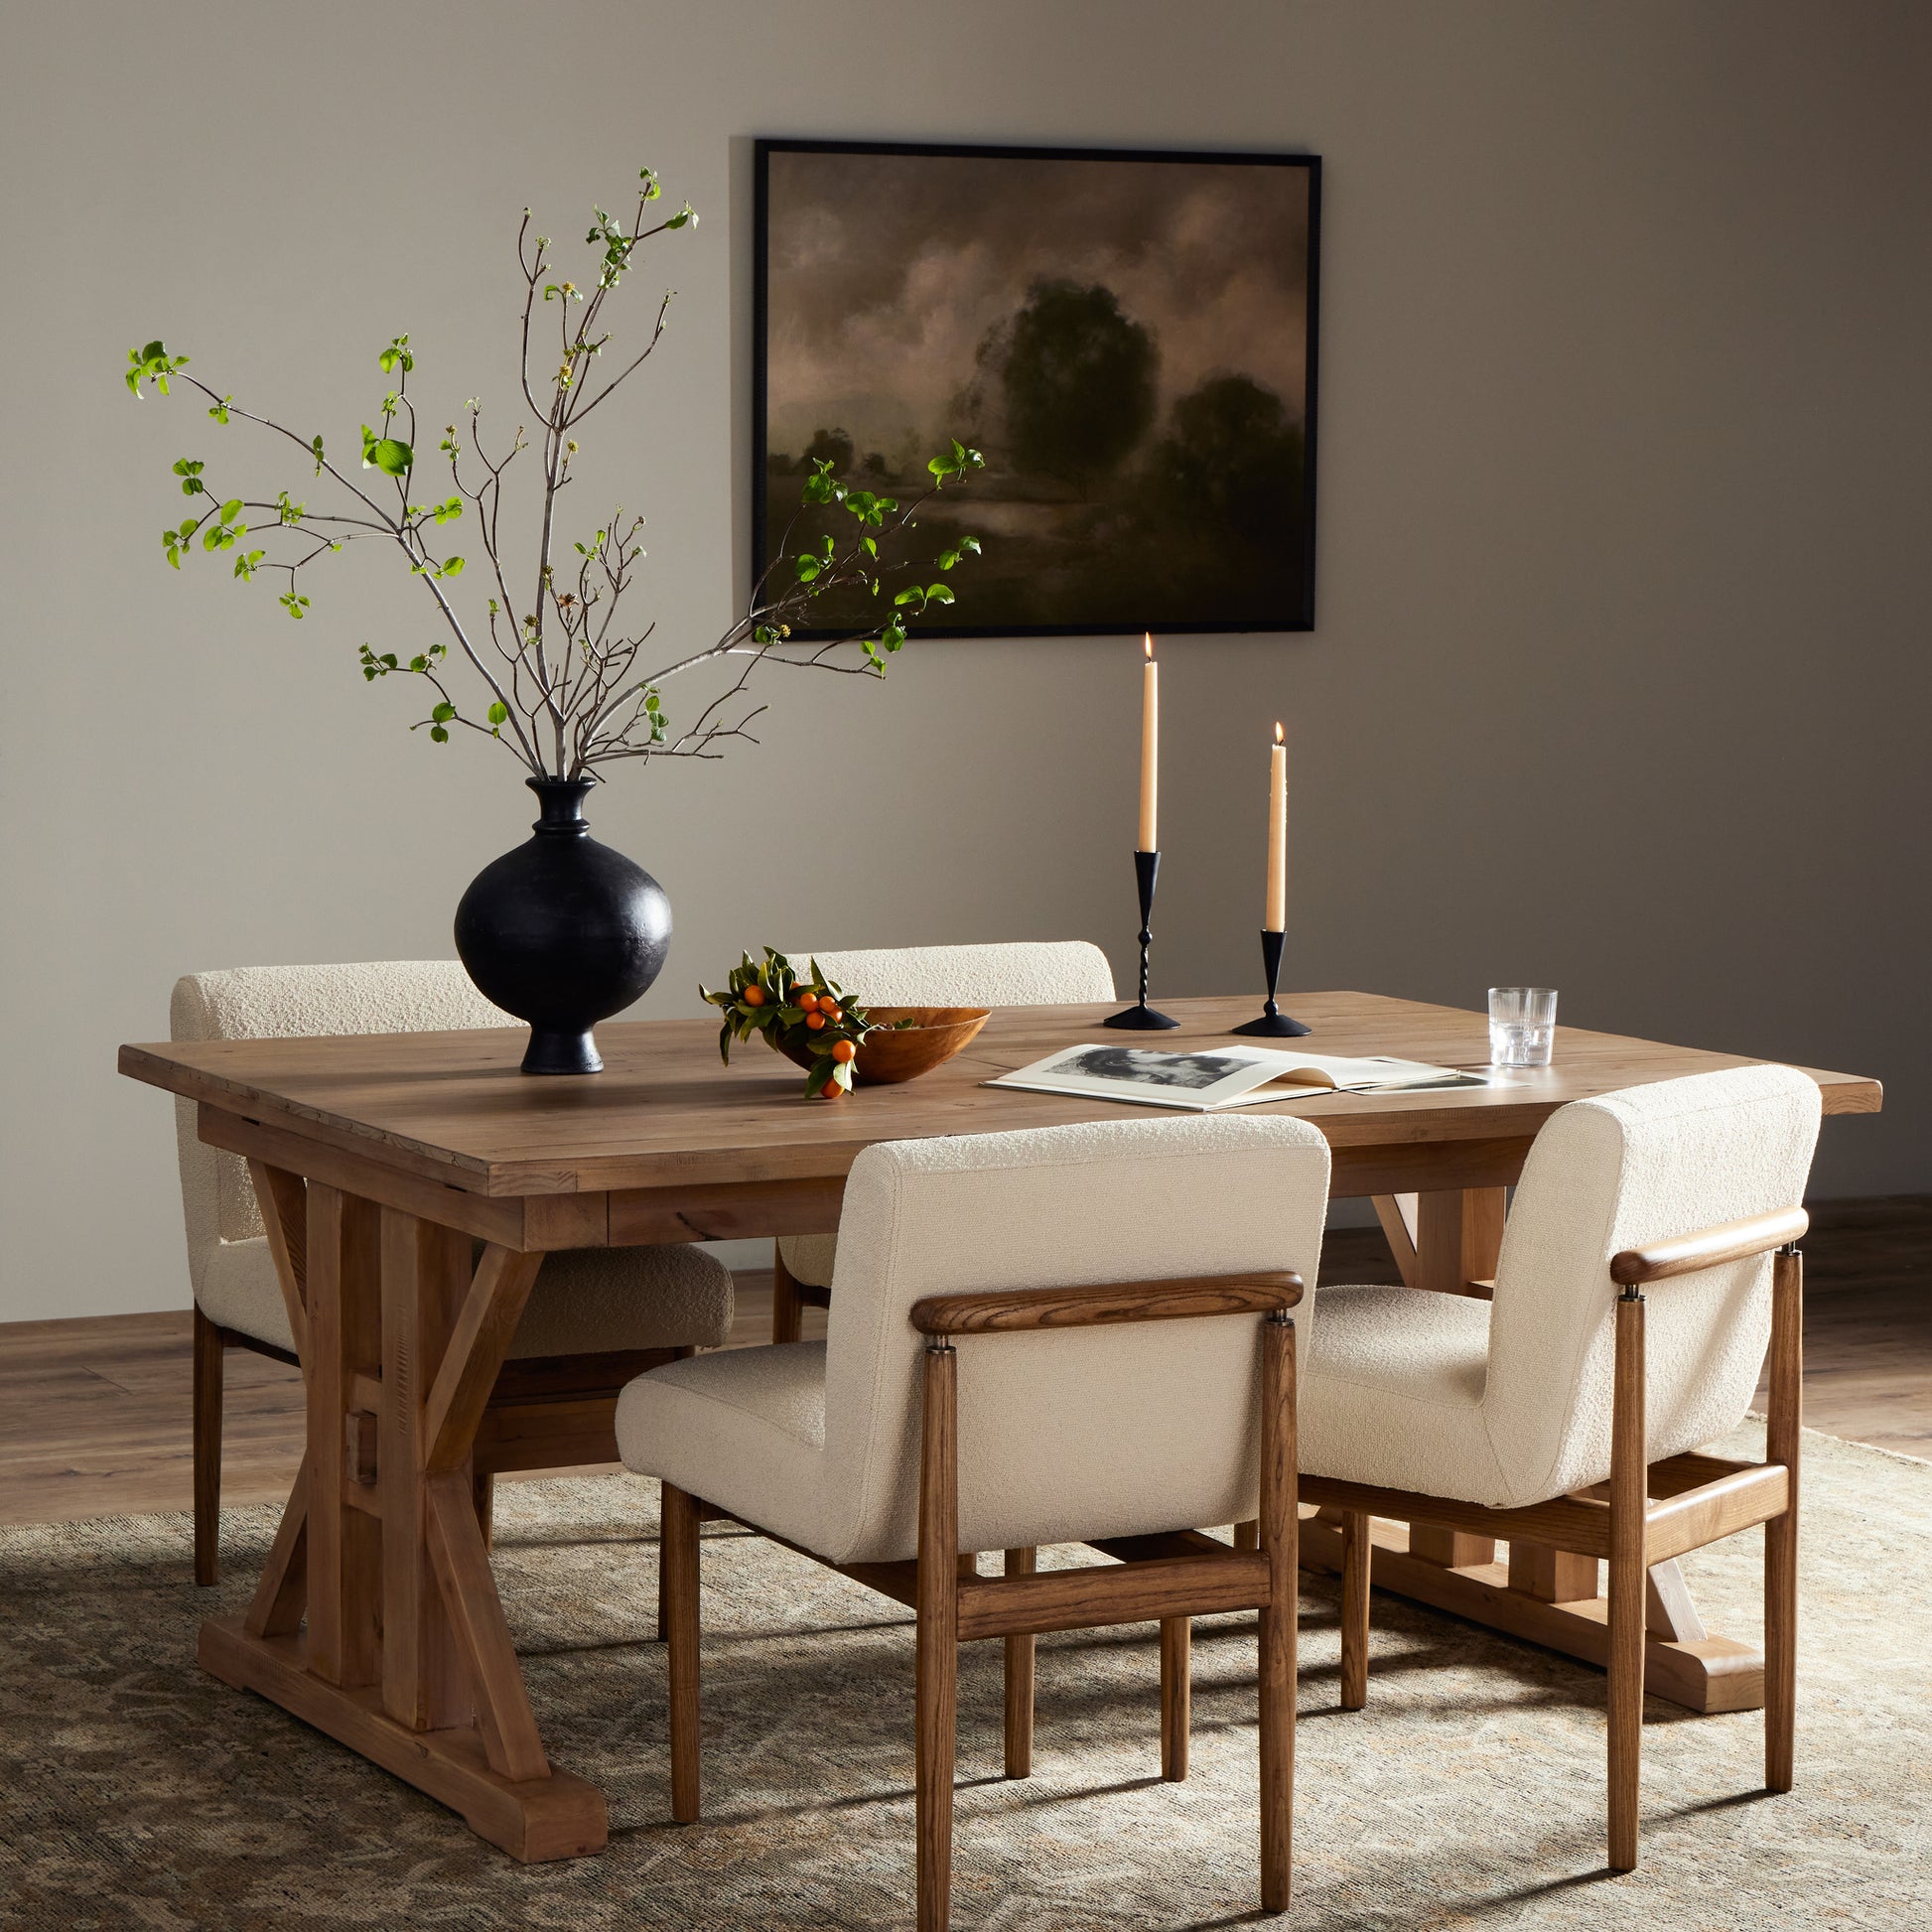 WOOD DINING TABLE WITH CHAIRS